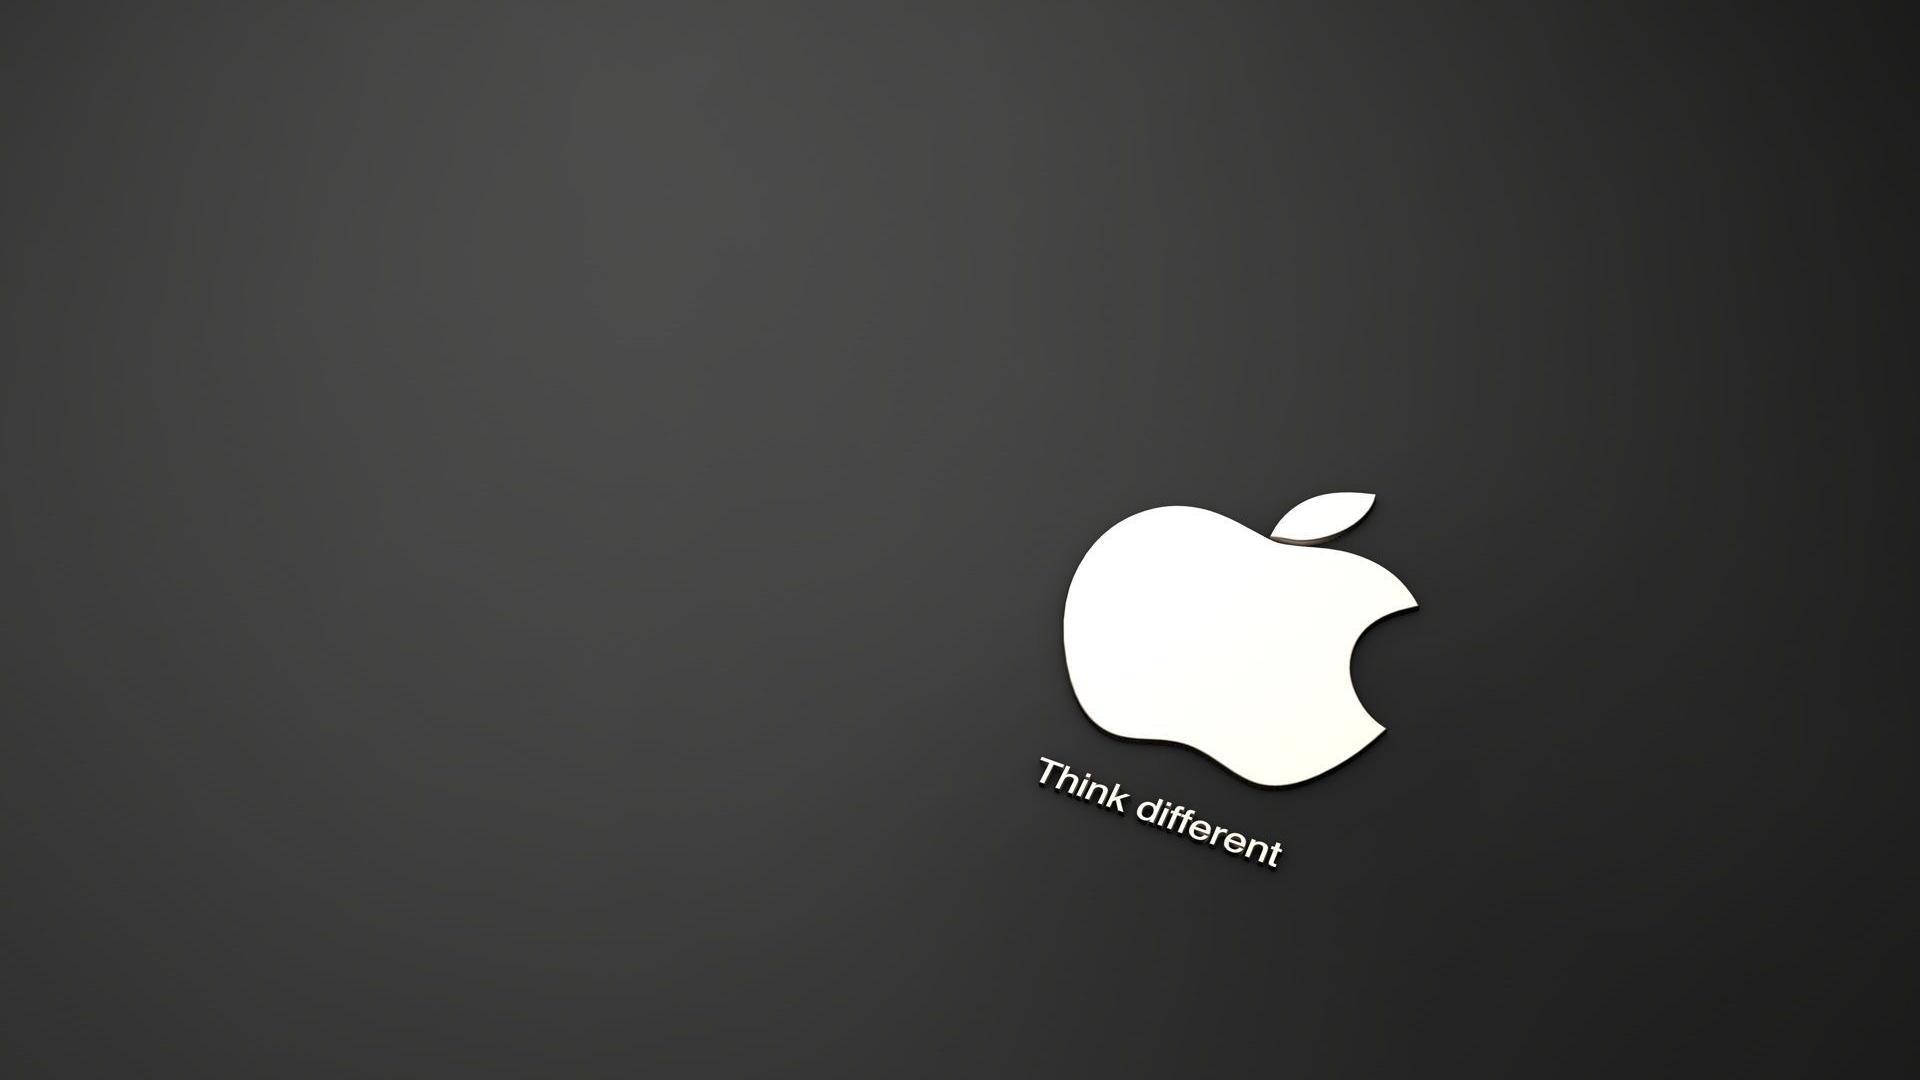 White Apple Logo 4k On Silver Gray Background Picture